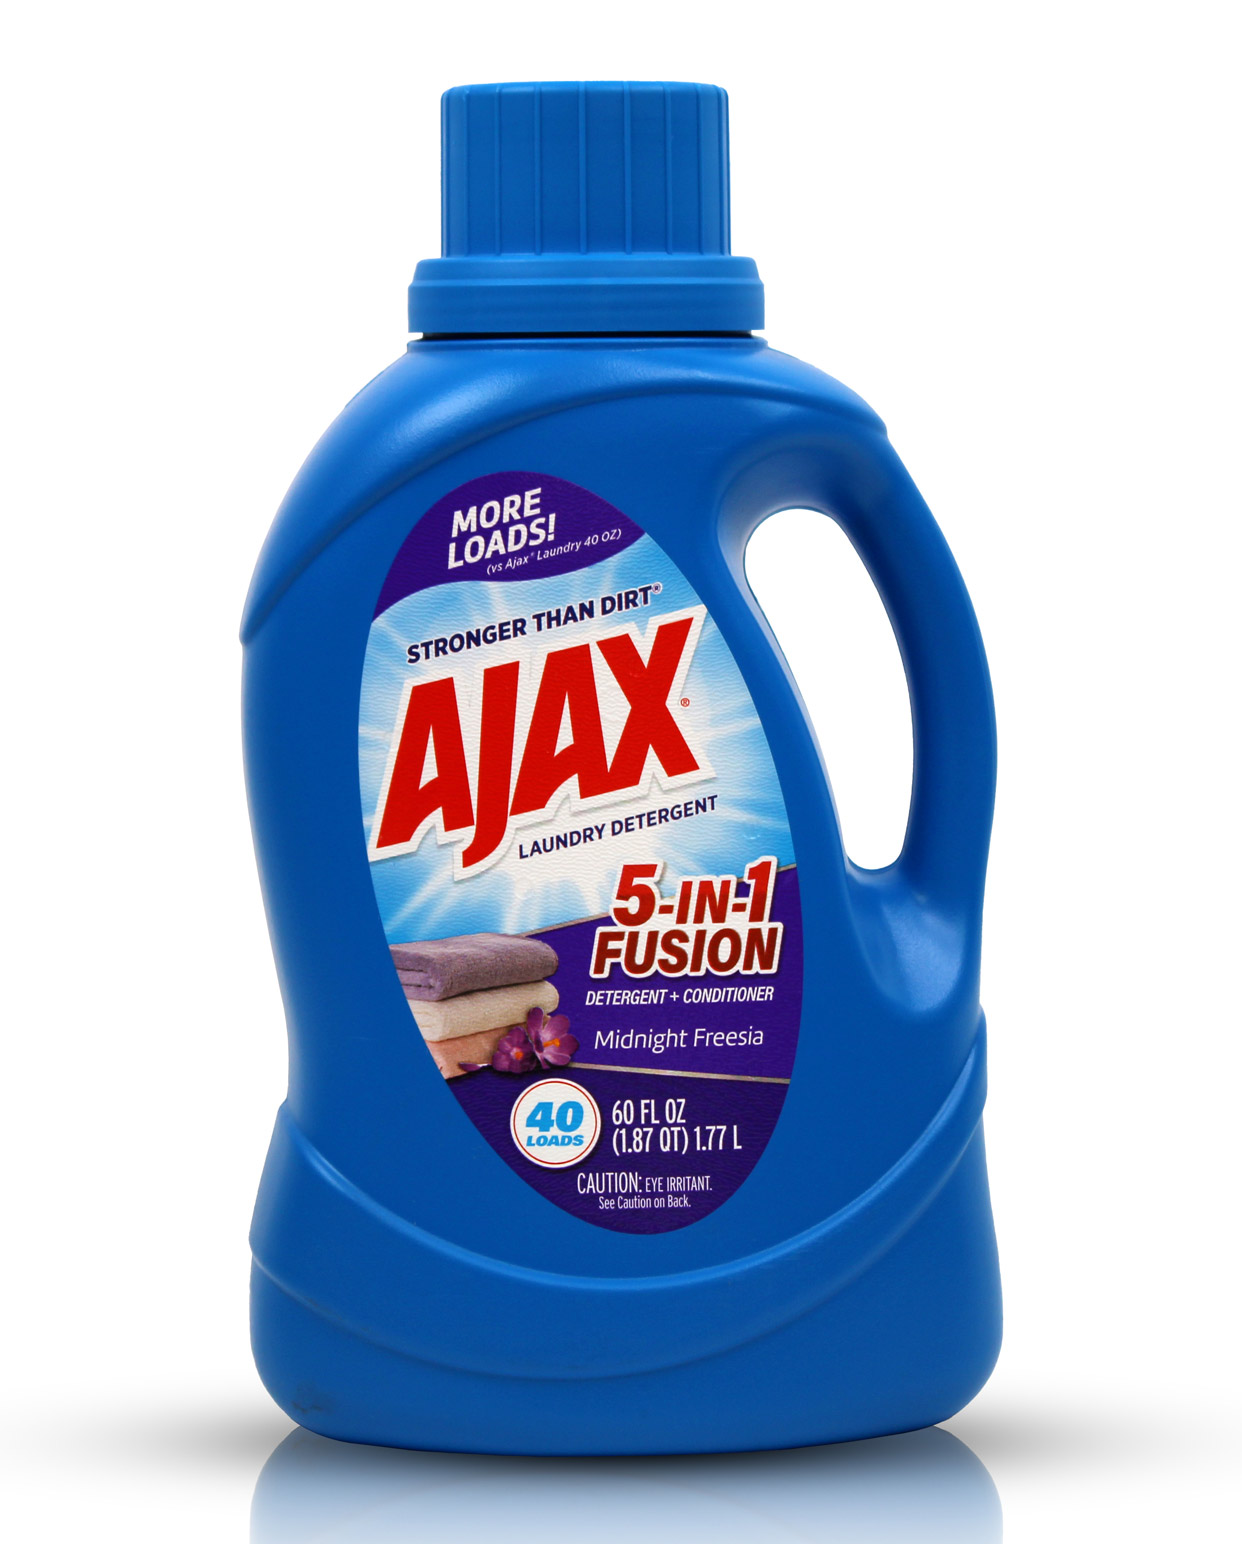 Laundry Detergent plus Conditioner bottle with a clear label displaying the brand name.